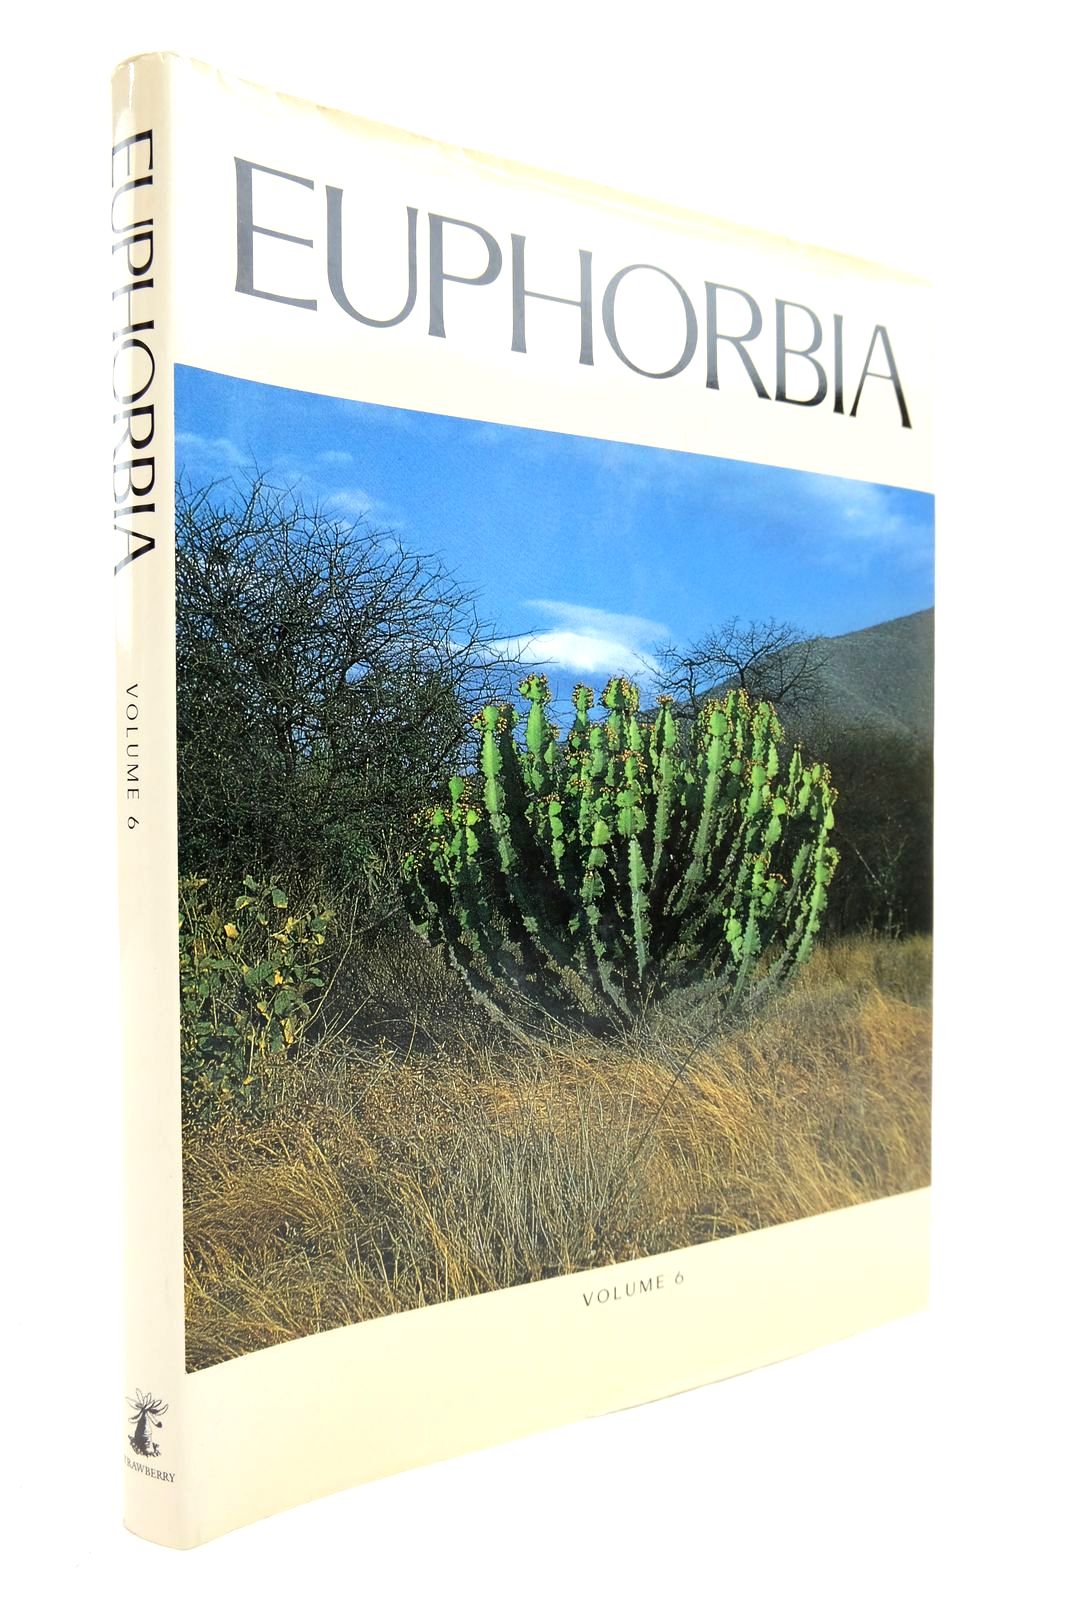 Photo of THE EUPHORBIA JOURNAL VOLUME VI written by Kimberly, Michael J. Rowley, Gordon Carter, Susan et al, published by Strawberry Press (STOCK CODE: 2139643)  for sale by Stella & Rose's Books